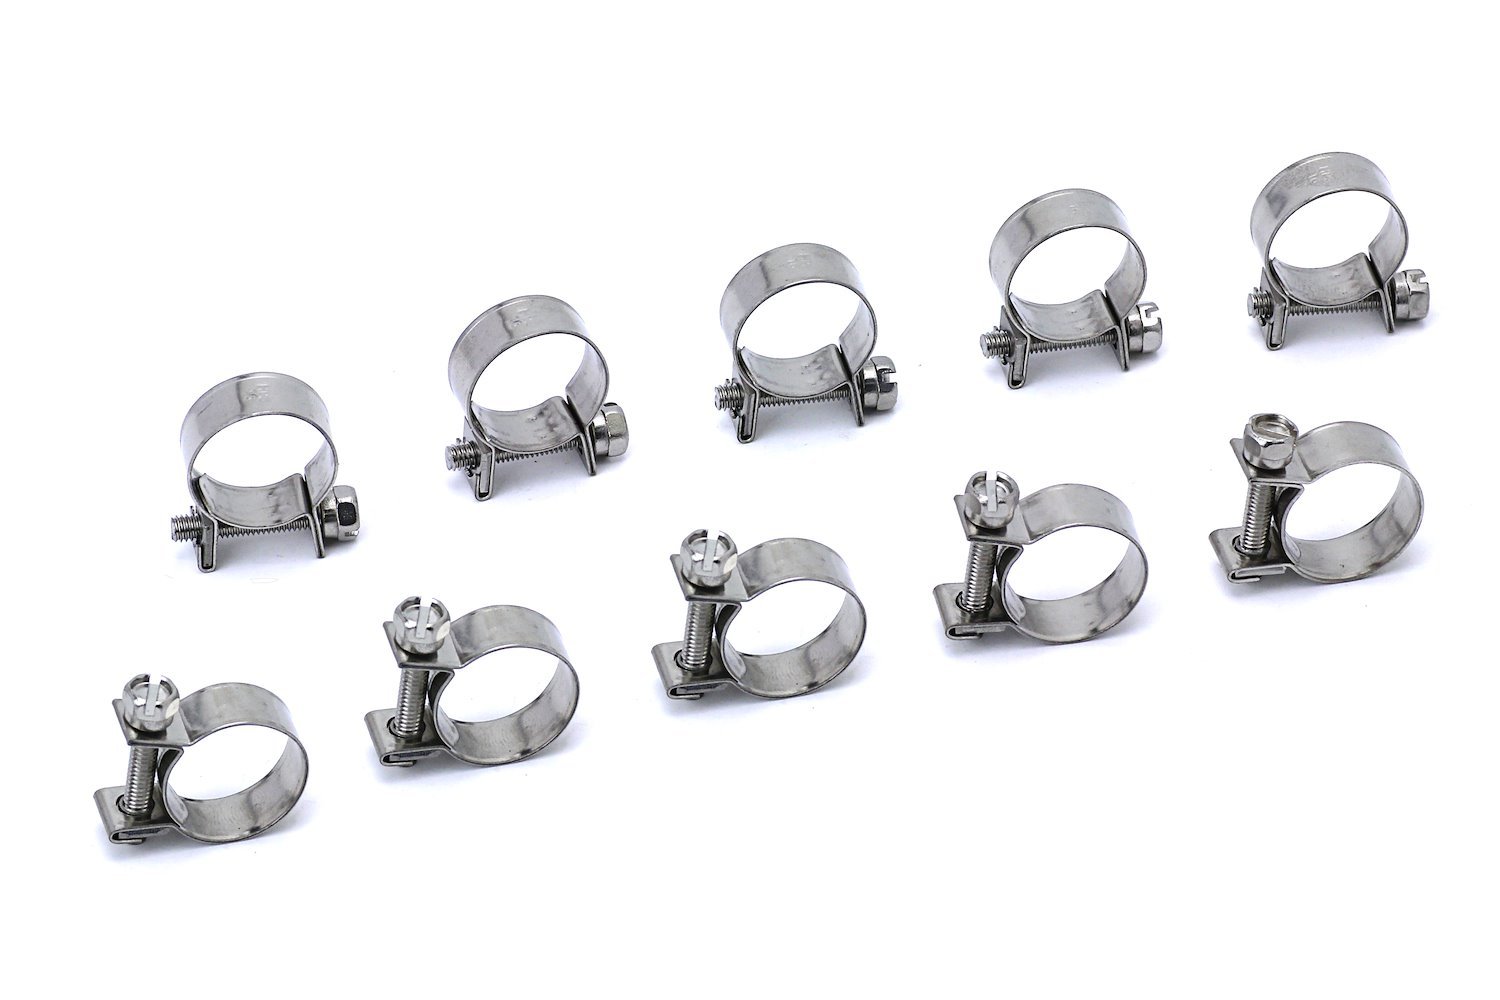 FIC-15x10 Fuel Injection Hose Clamp, 10 Stainless Steel Small Hose Clamps, SAE Size 17, 19/32 in. - 43/64 in. (15 mm-17 mm)